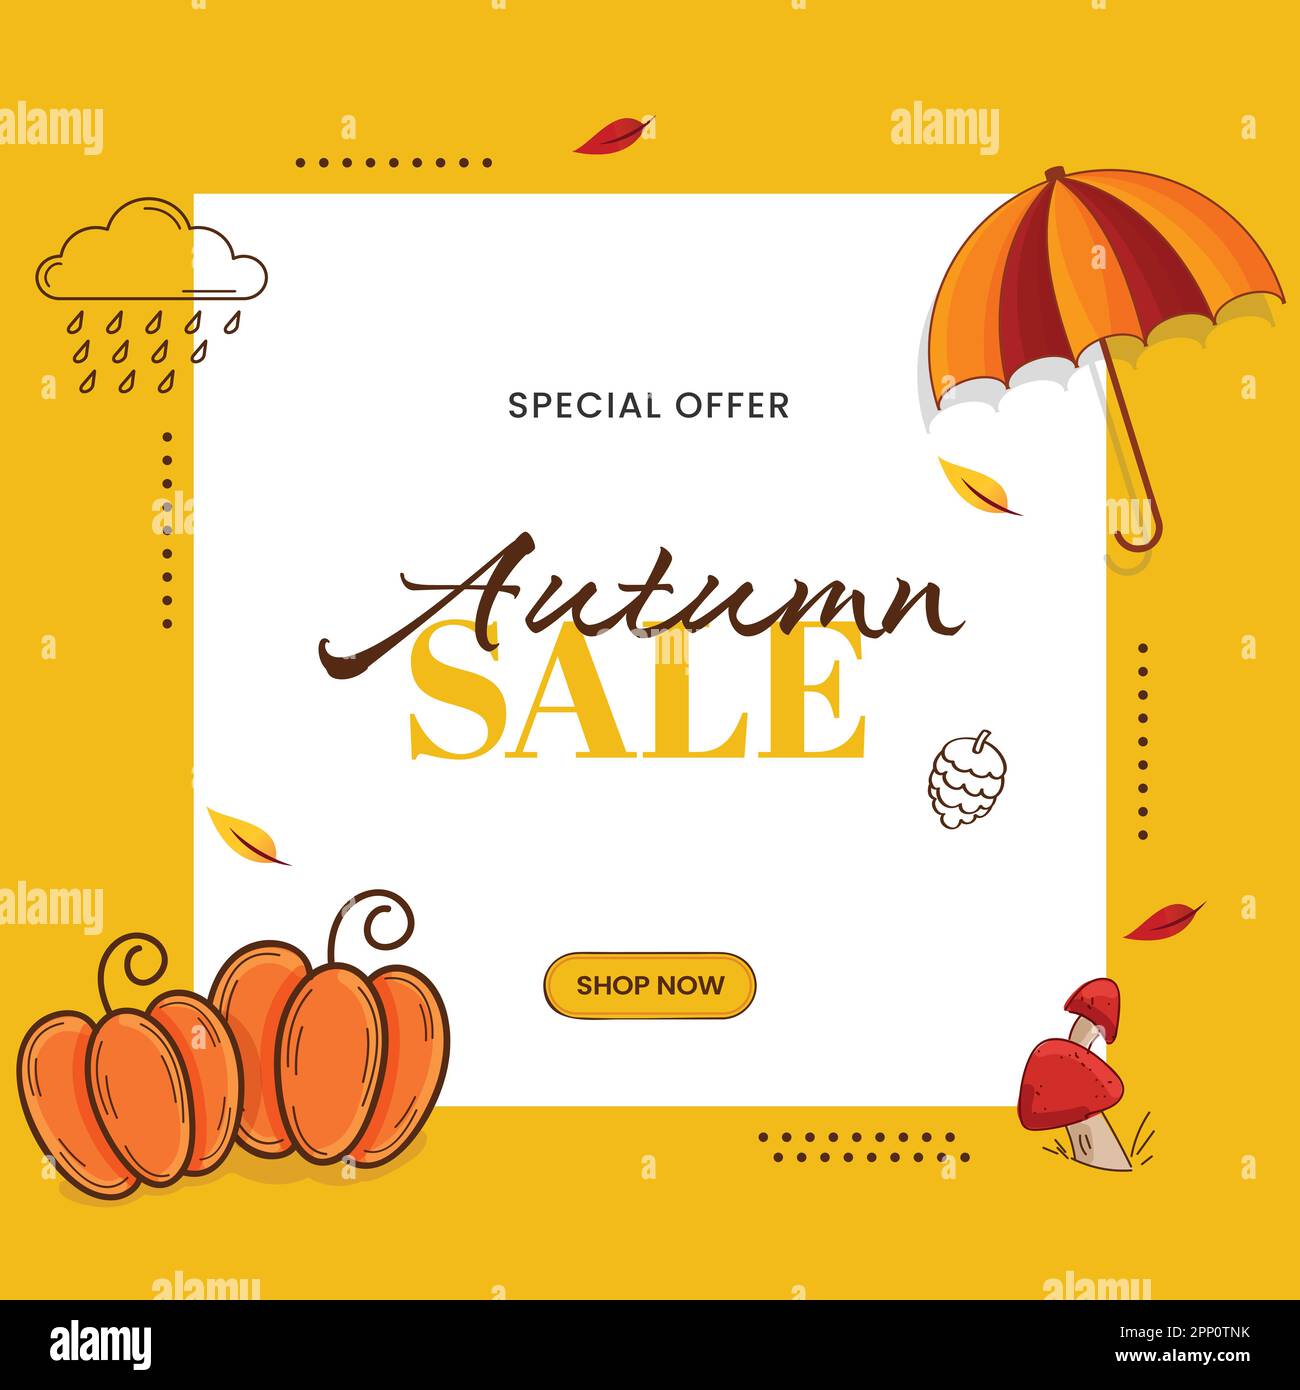 Autumn Sale Poster Design With Flat Pumpkins, Toadstool, Umbrella On White And Yellow Background. Stock Vector